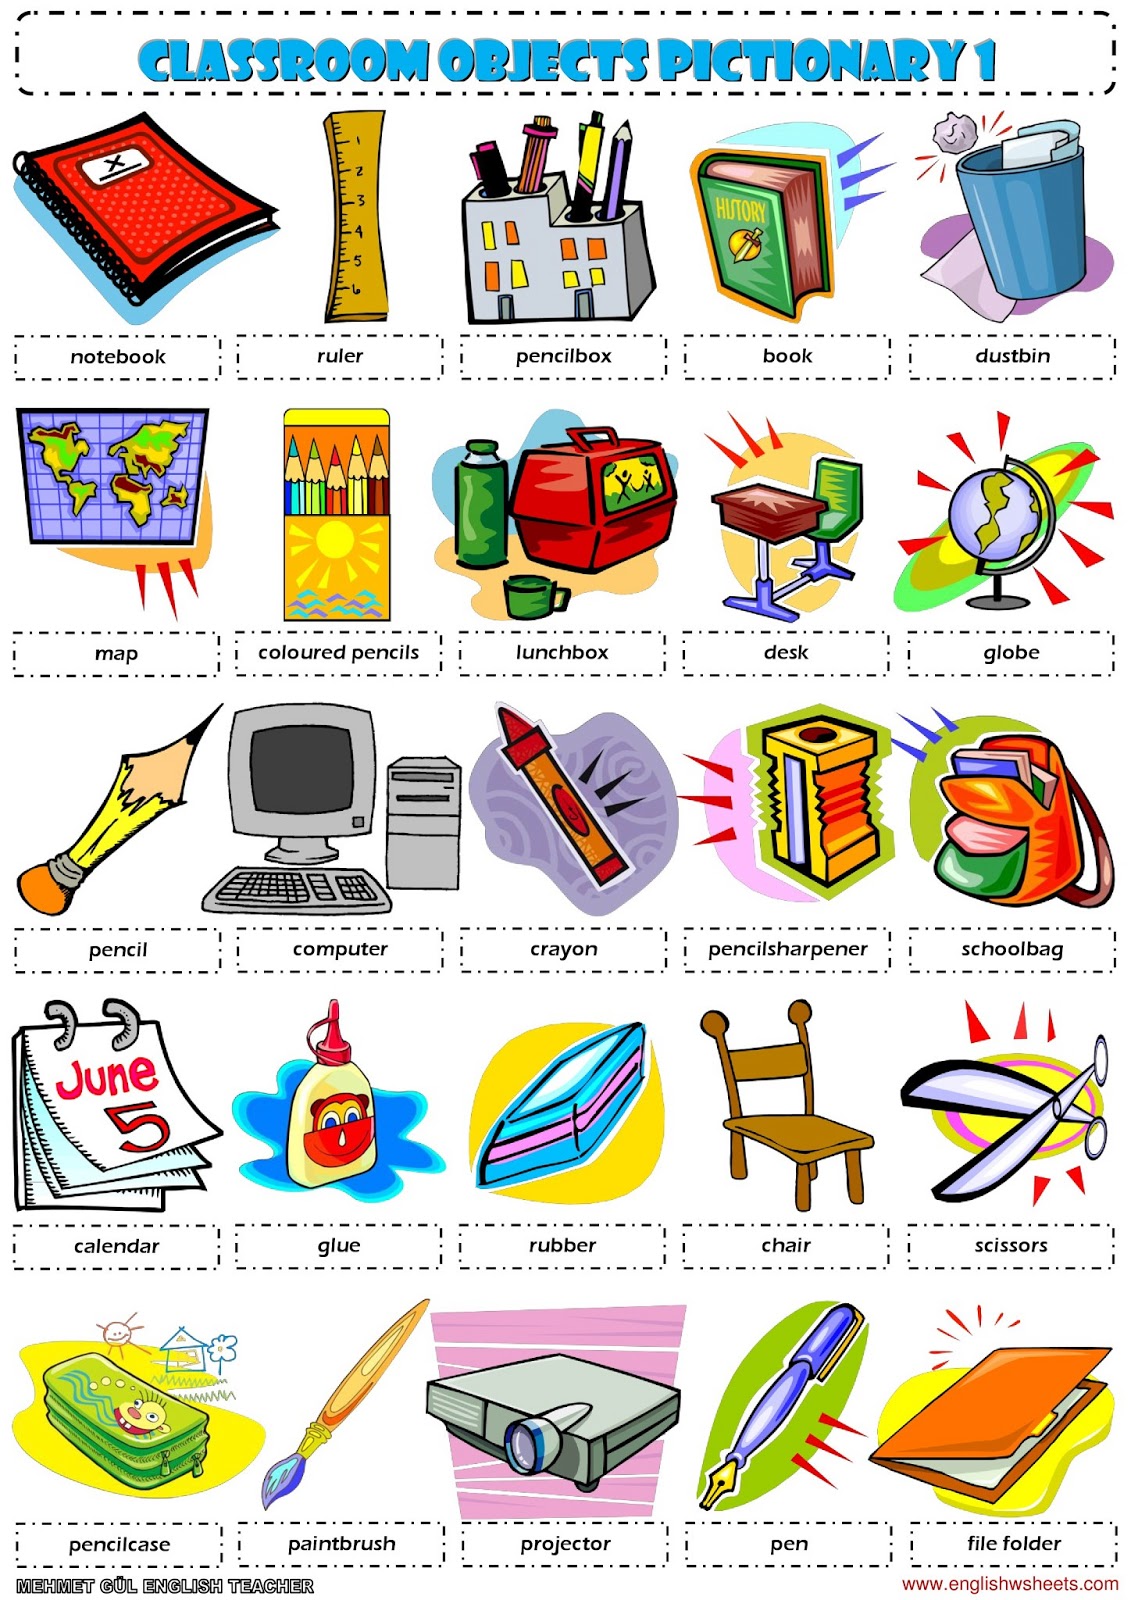 classroom objects clipart free - photo #28